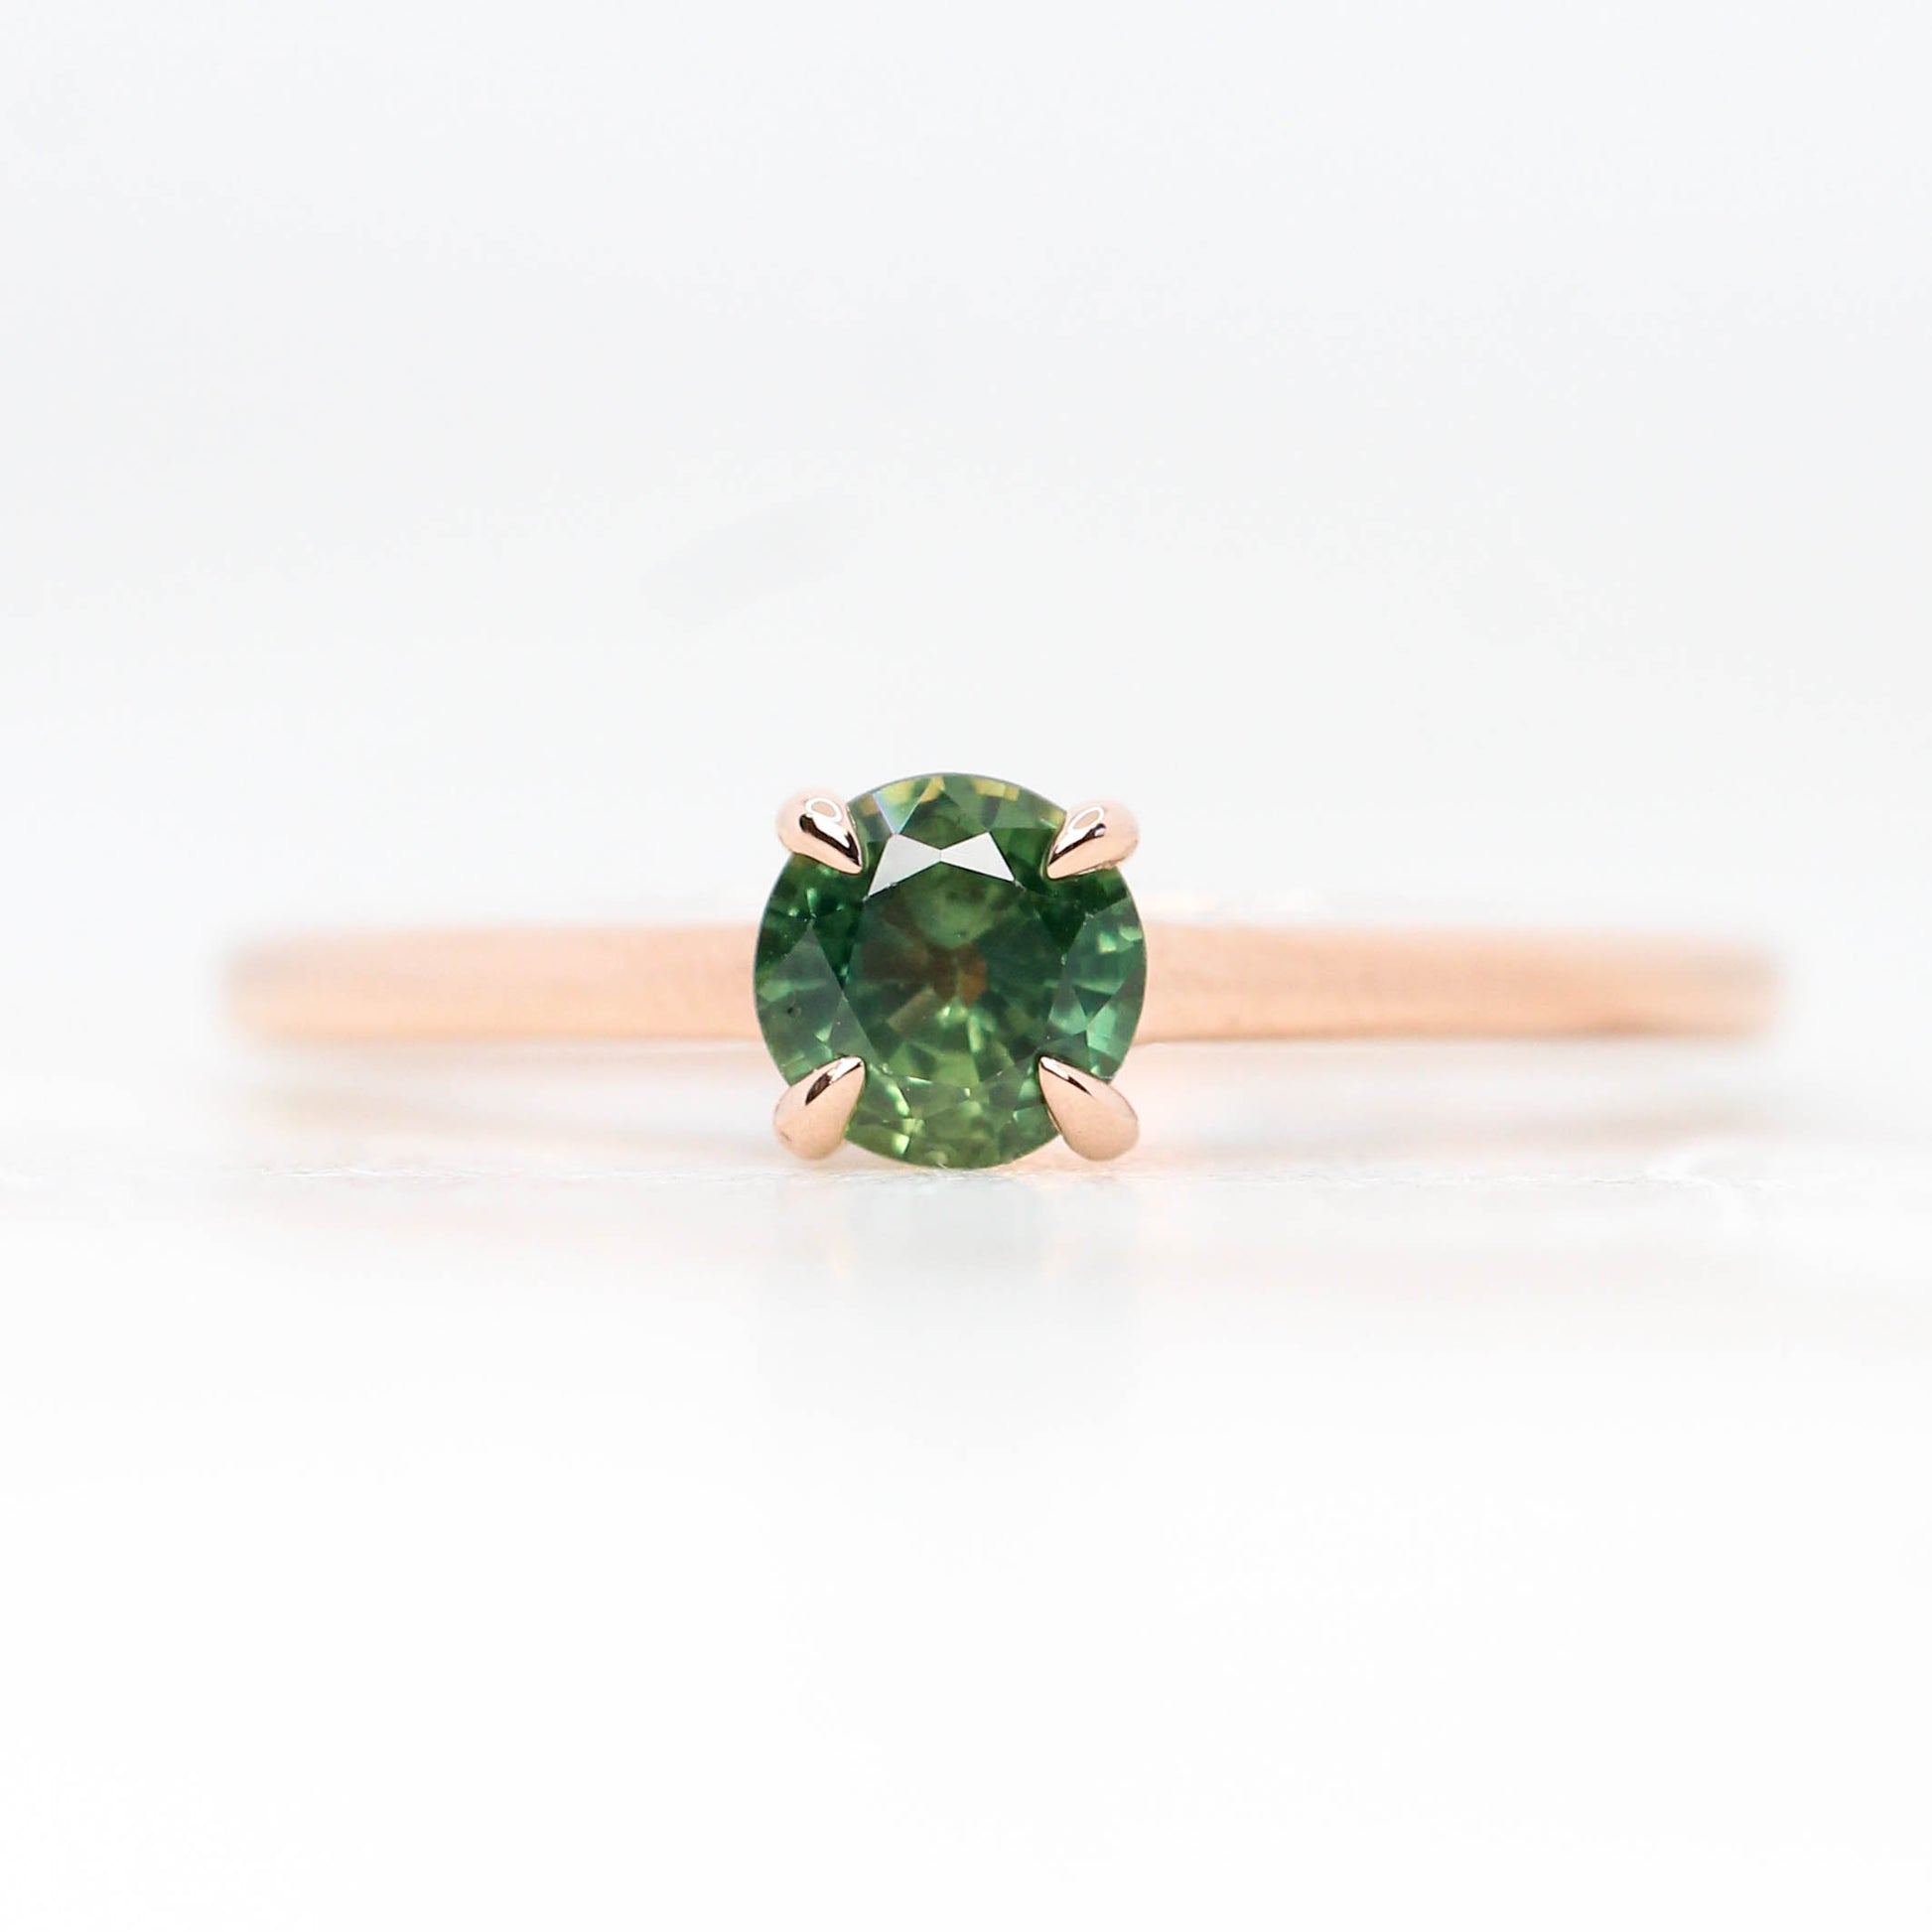 Elle Ring with a 0.49 Carat Teal Green Round Australian Sapphire in 14k Rose Gold - Ready to Size and Ship - Midwinter Co. Alternative Bridal Rings and Modern Fine Jewelry